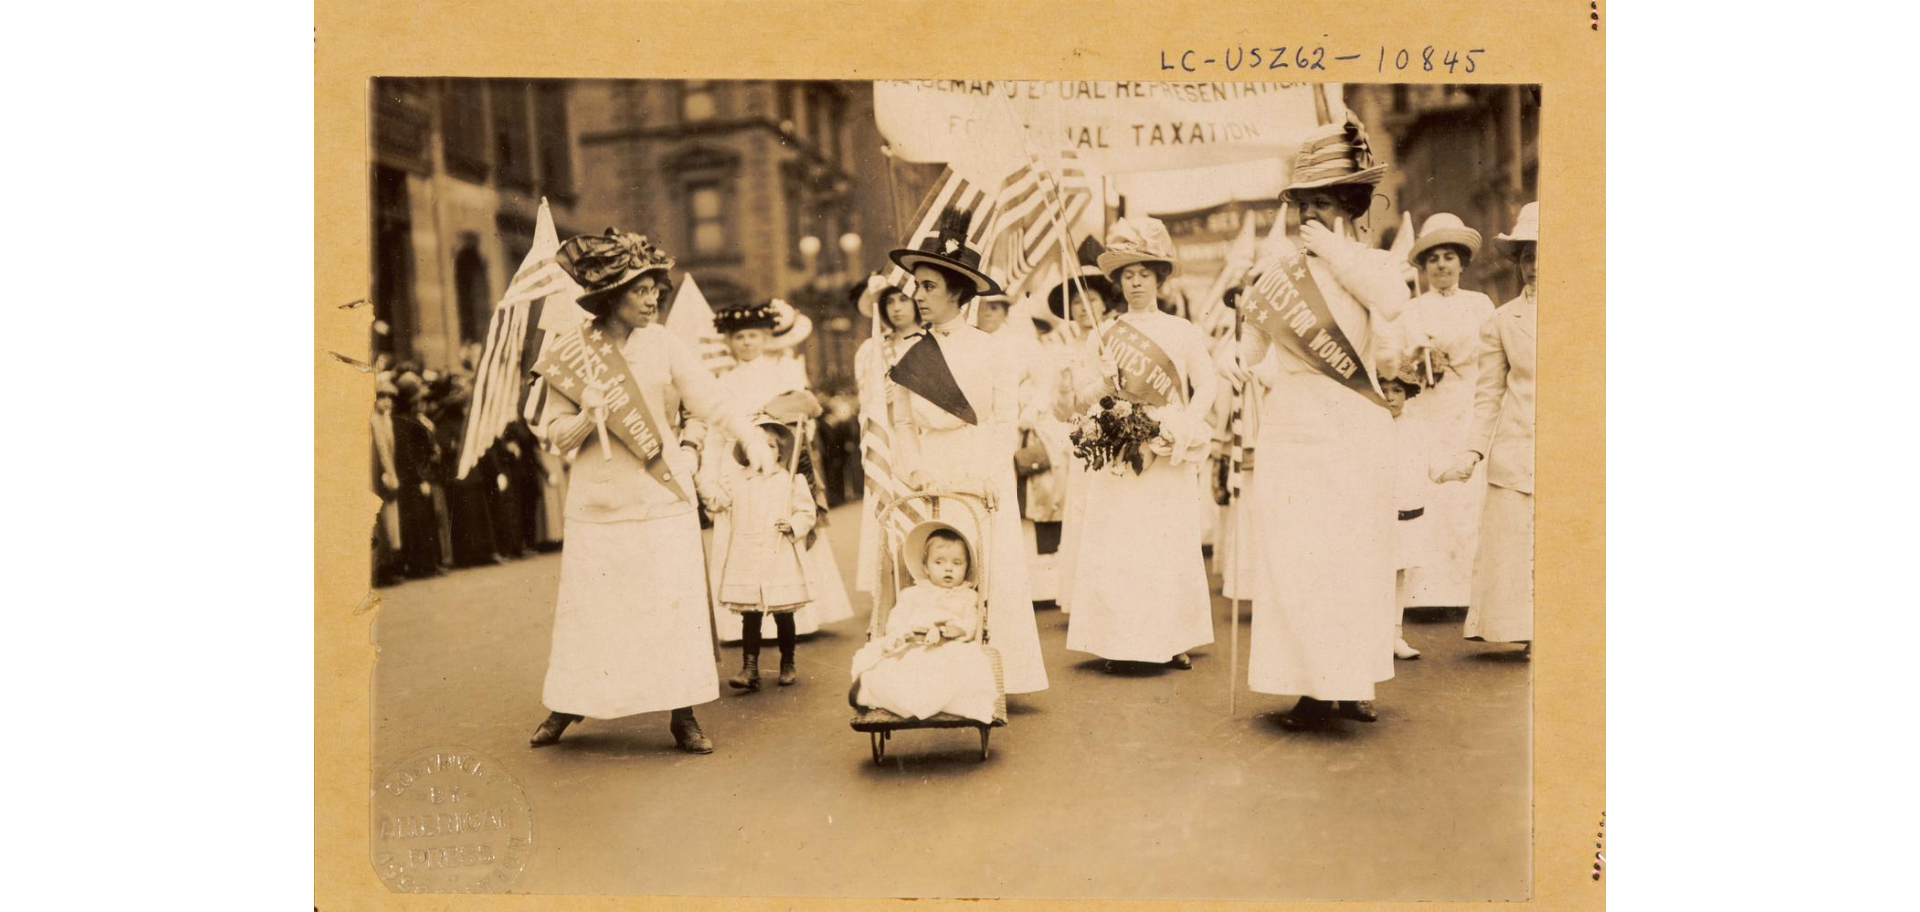 A group of women, wearing sashes and carrying banners, march in a parade to promote women's suffrage. A woman in the center of the group is pushing a baby in a stroller. 